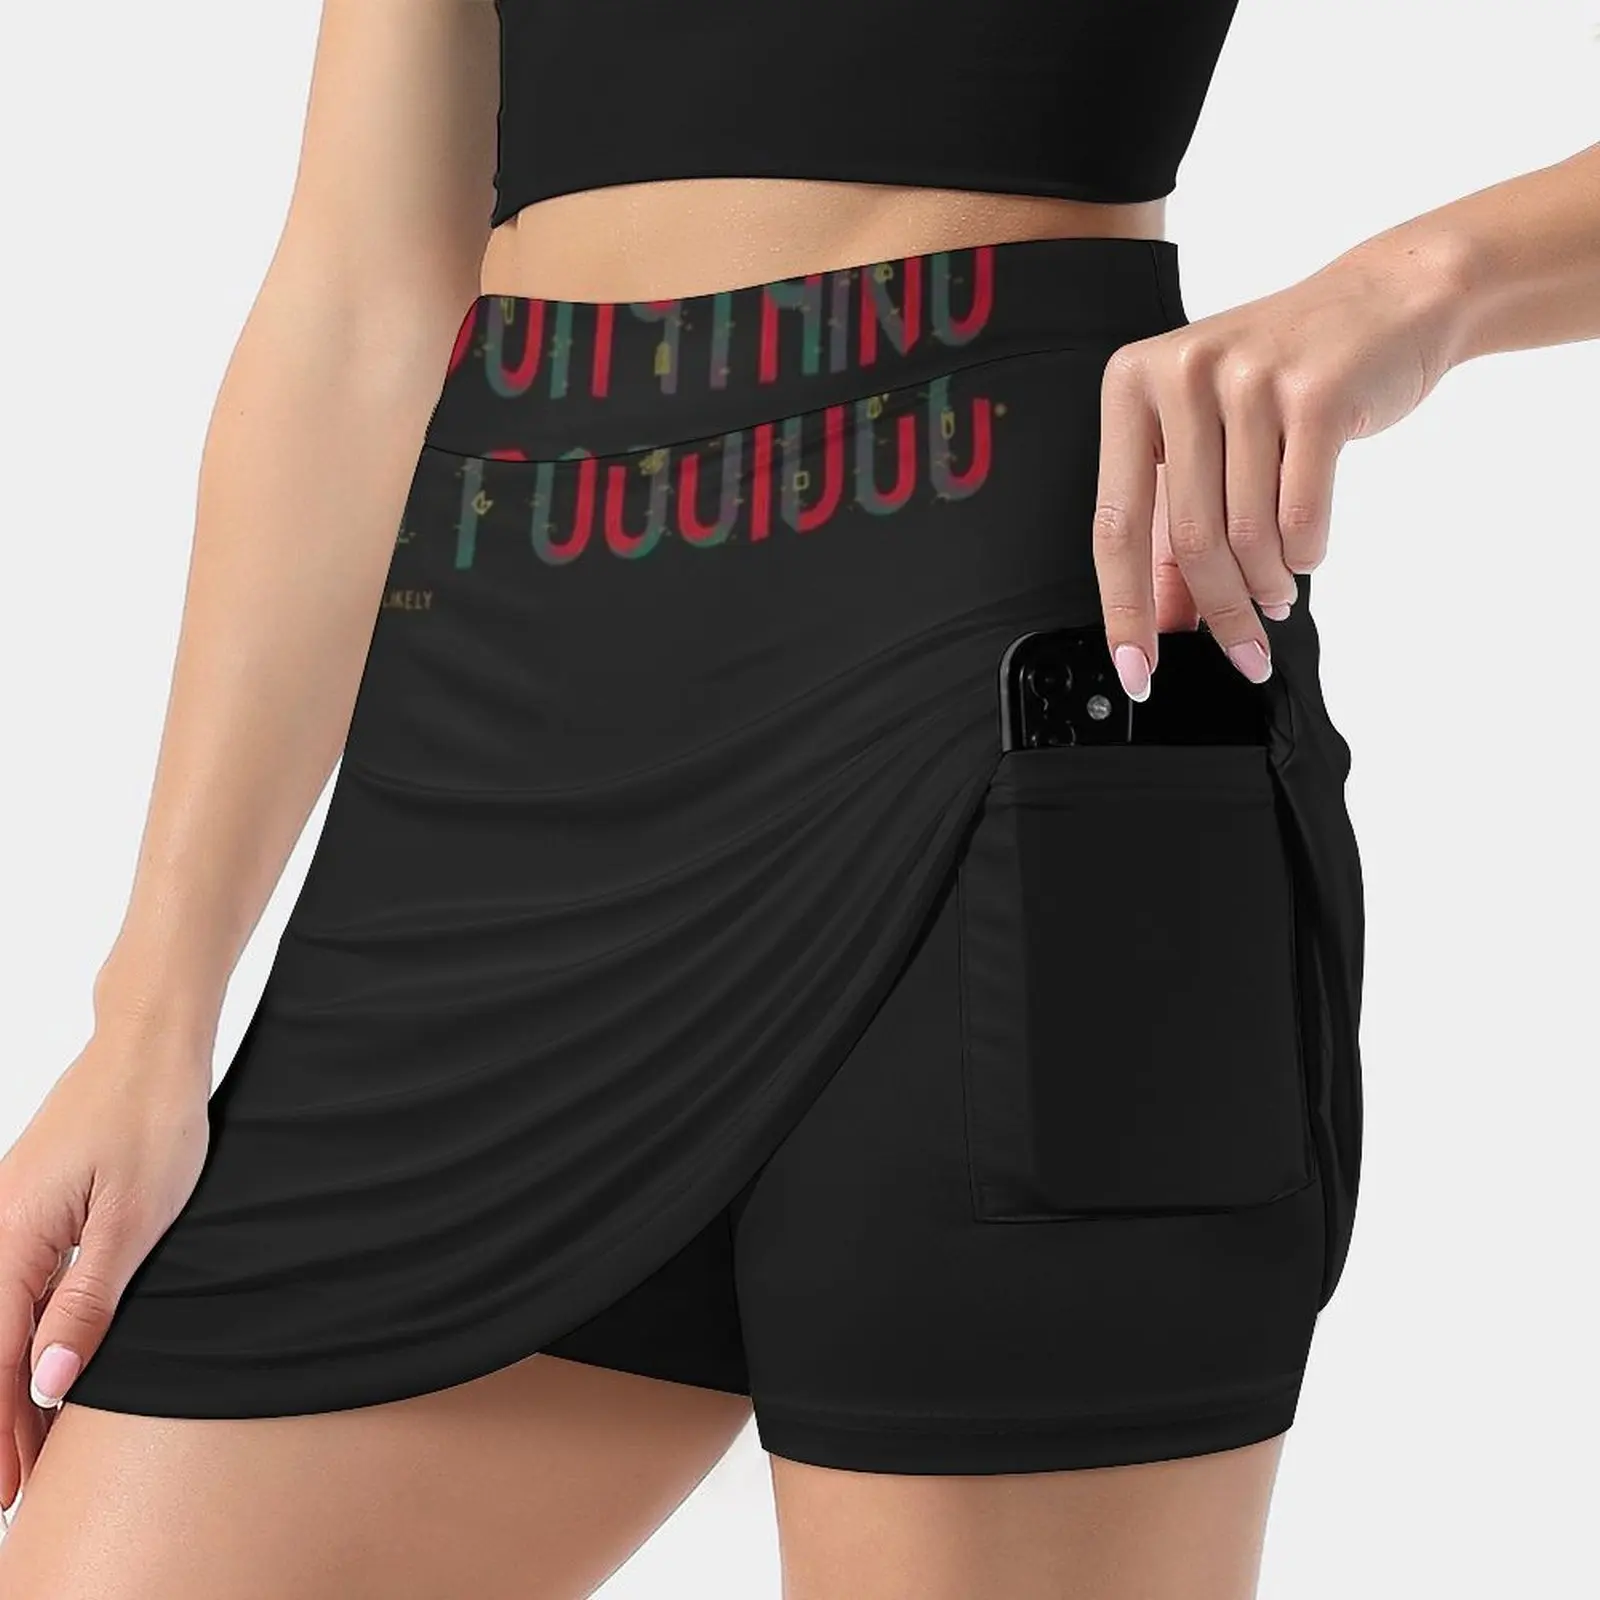 

Unlikely Women's skirt Aesthetic skirts New Fashion Short Skirts Type Typography Shapes Geometric Motivation Reality Text